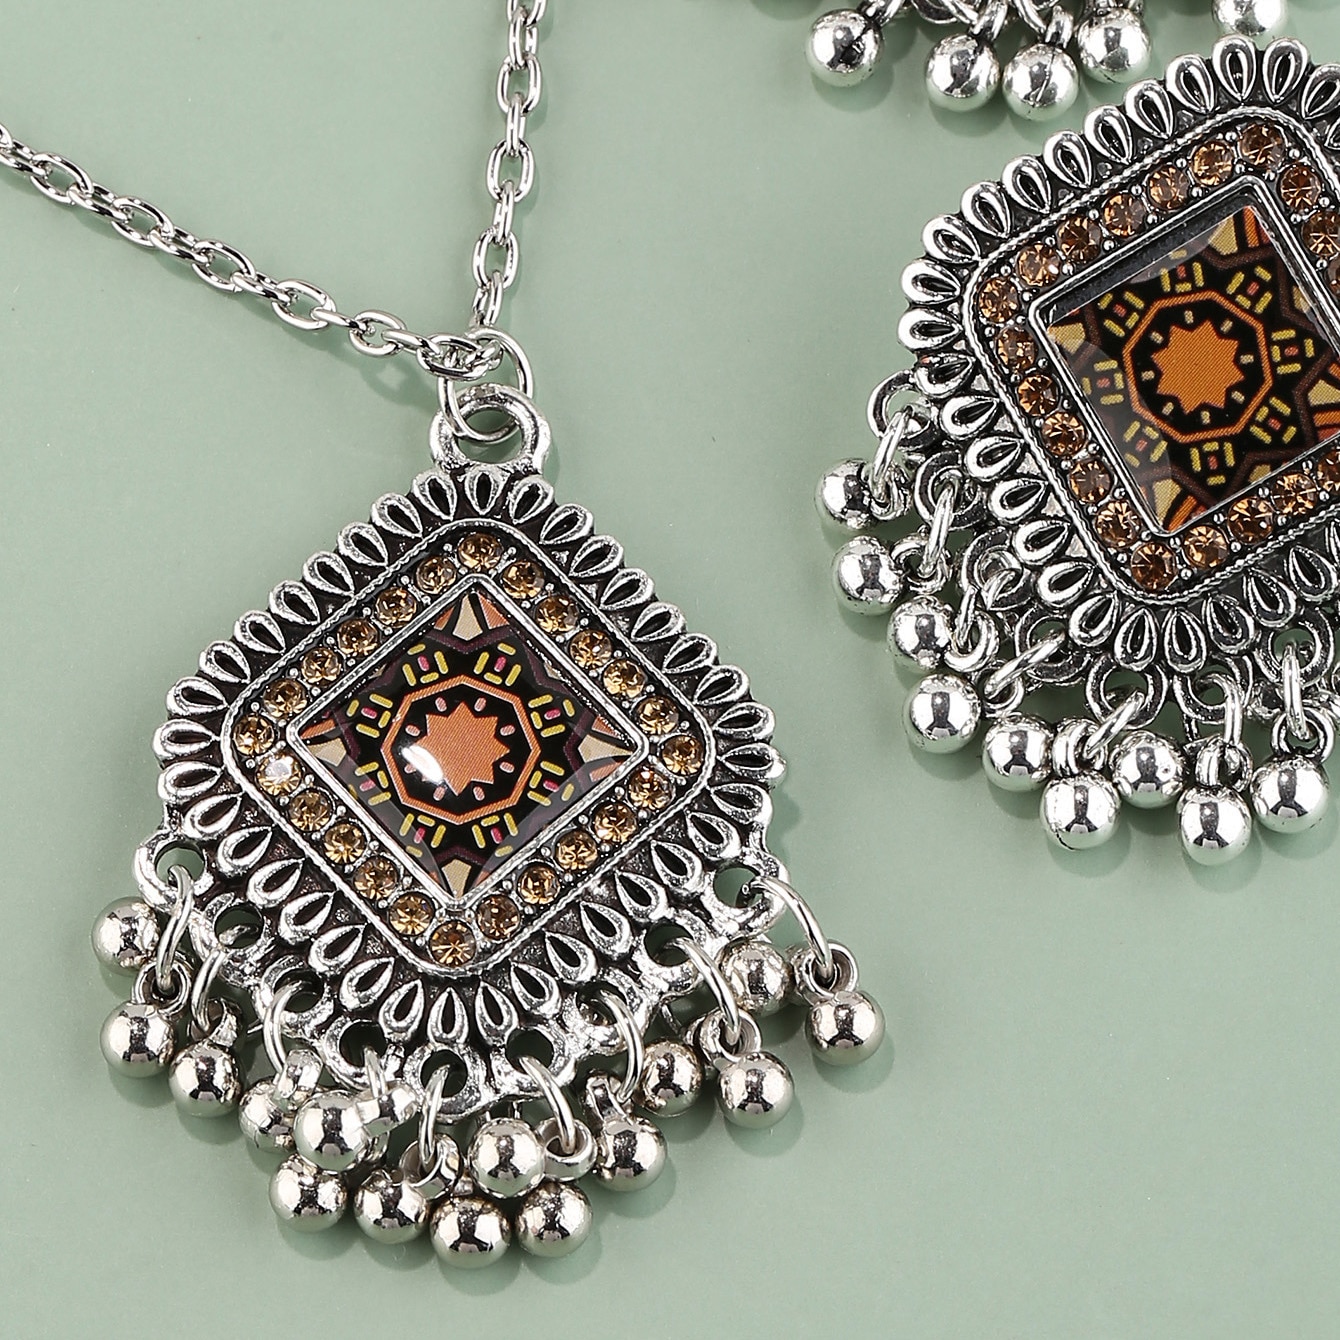 Vintage-Silver-Color-Flower-Jewelry-Sets-For-Women-Bell-Tassel-Necklaces-Earring-Bridal-Afghan-India-3256804350137978-4